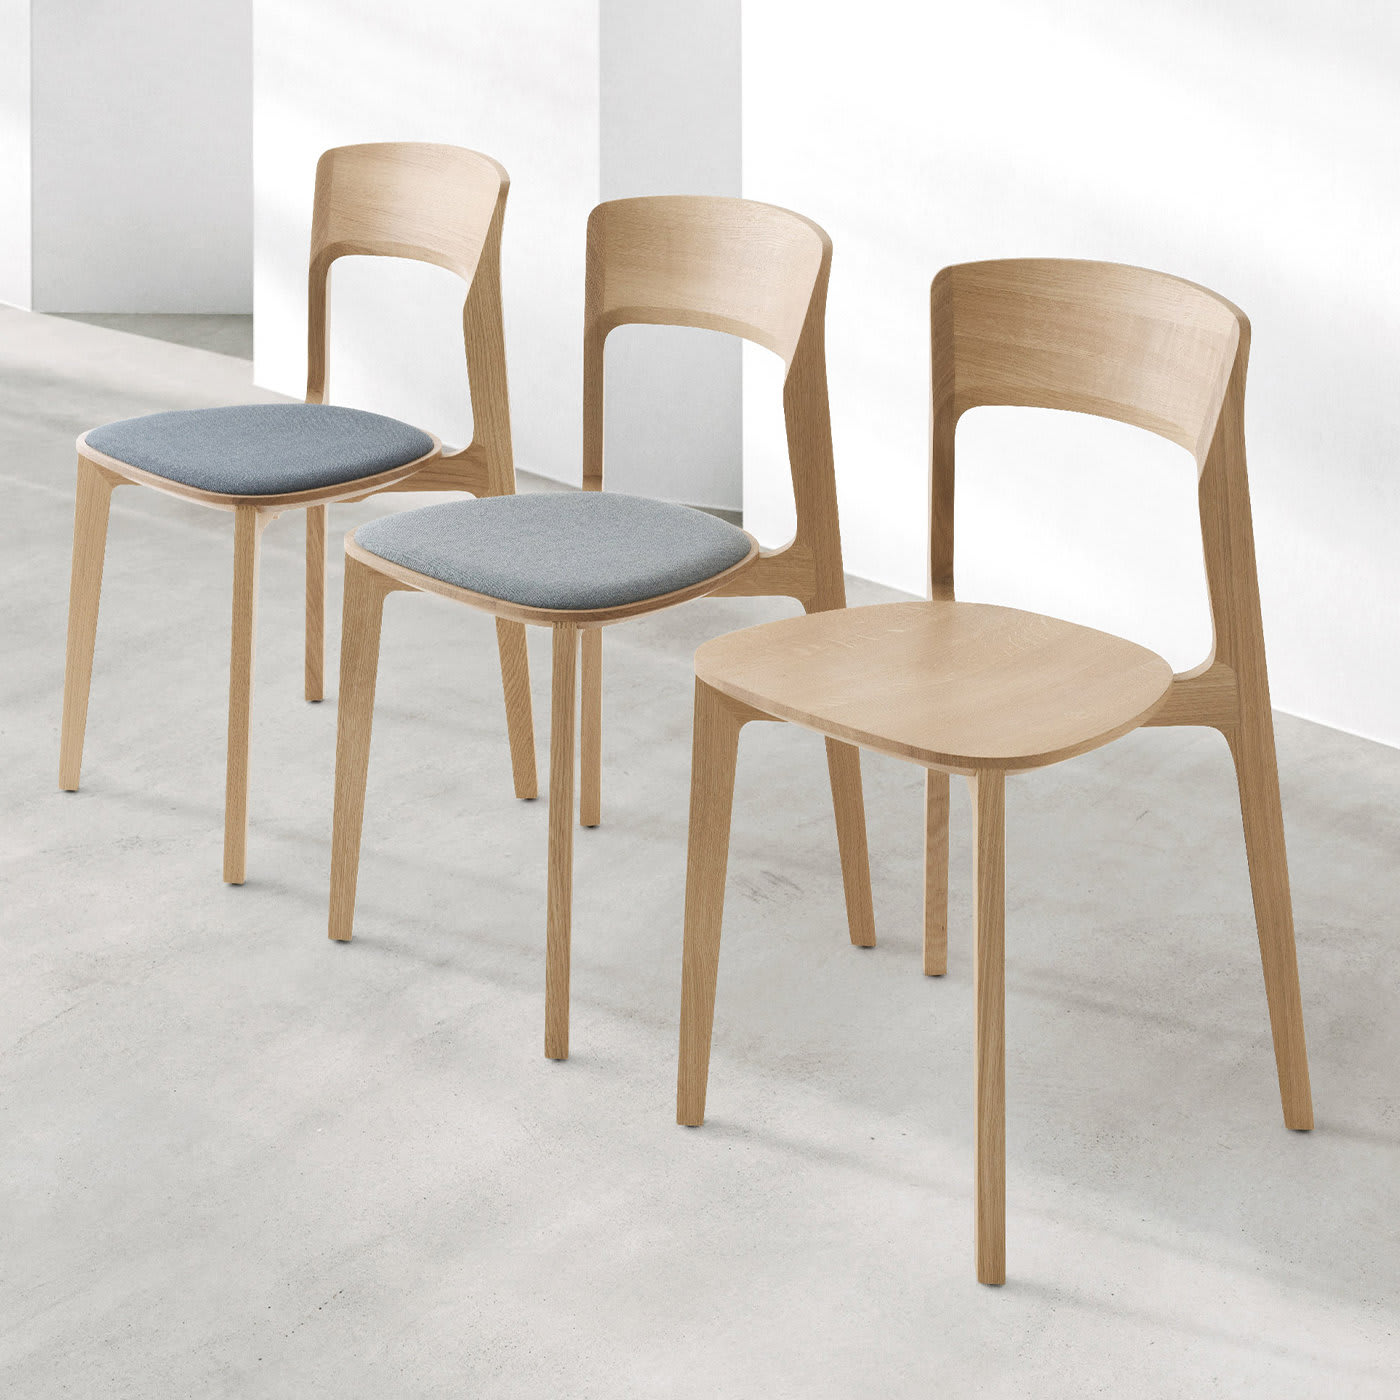 Cetonia Natural Oak Chair with Gray Upholstered Seat - Passoni Design